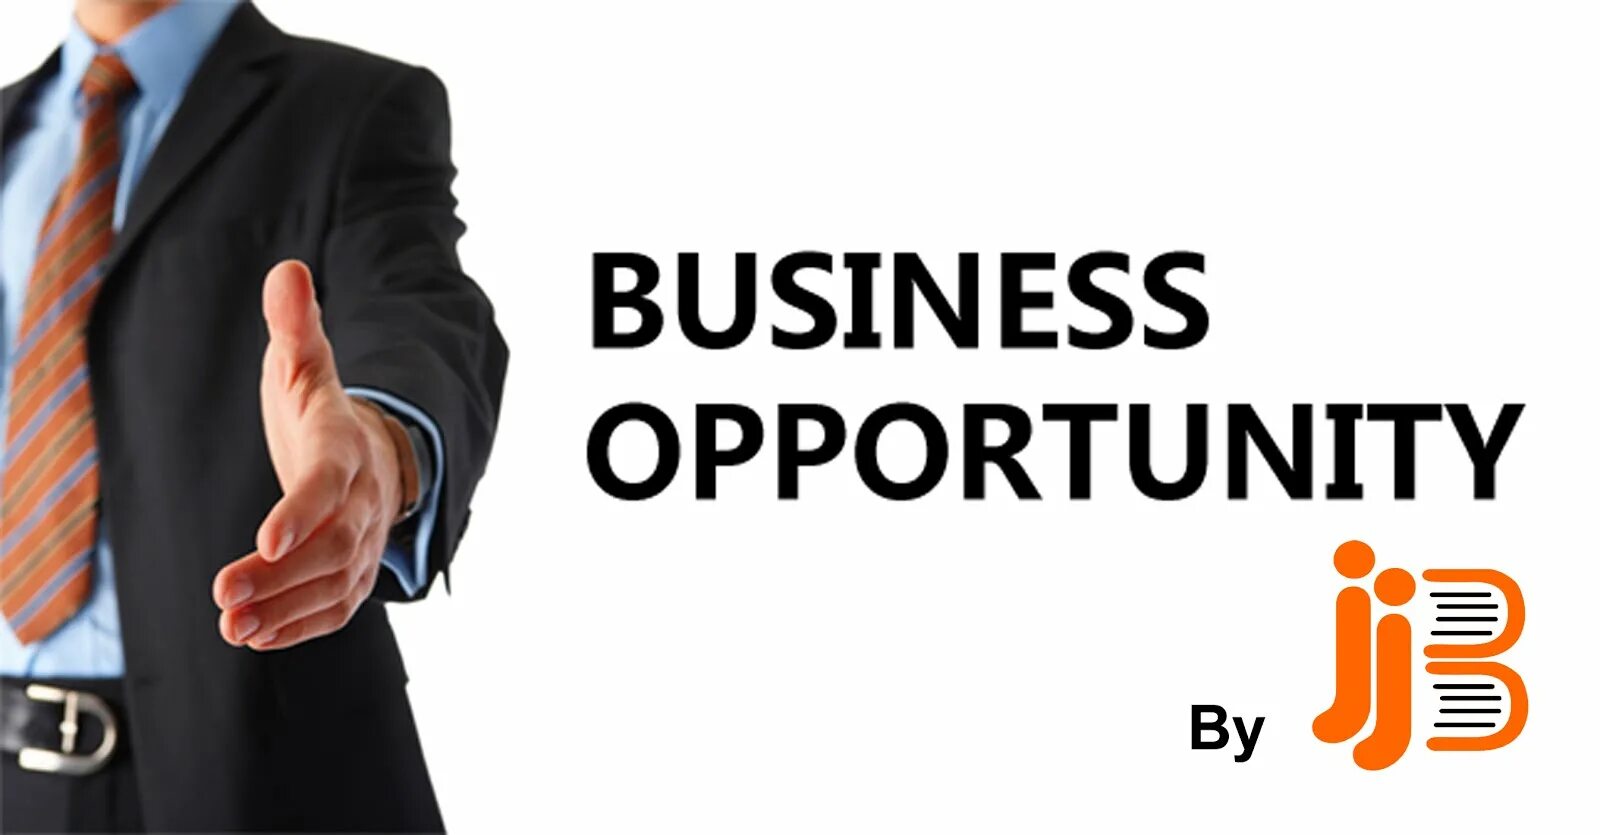 Business opportunity. Business opportunities